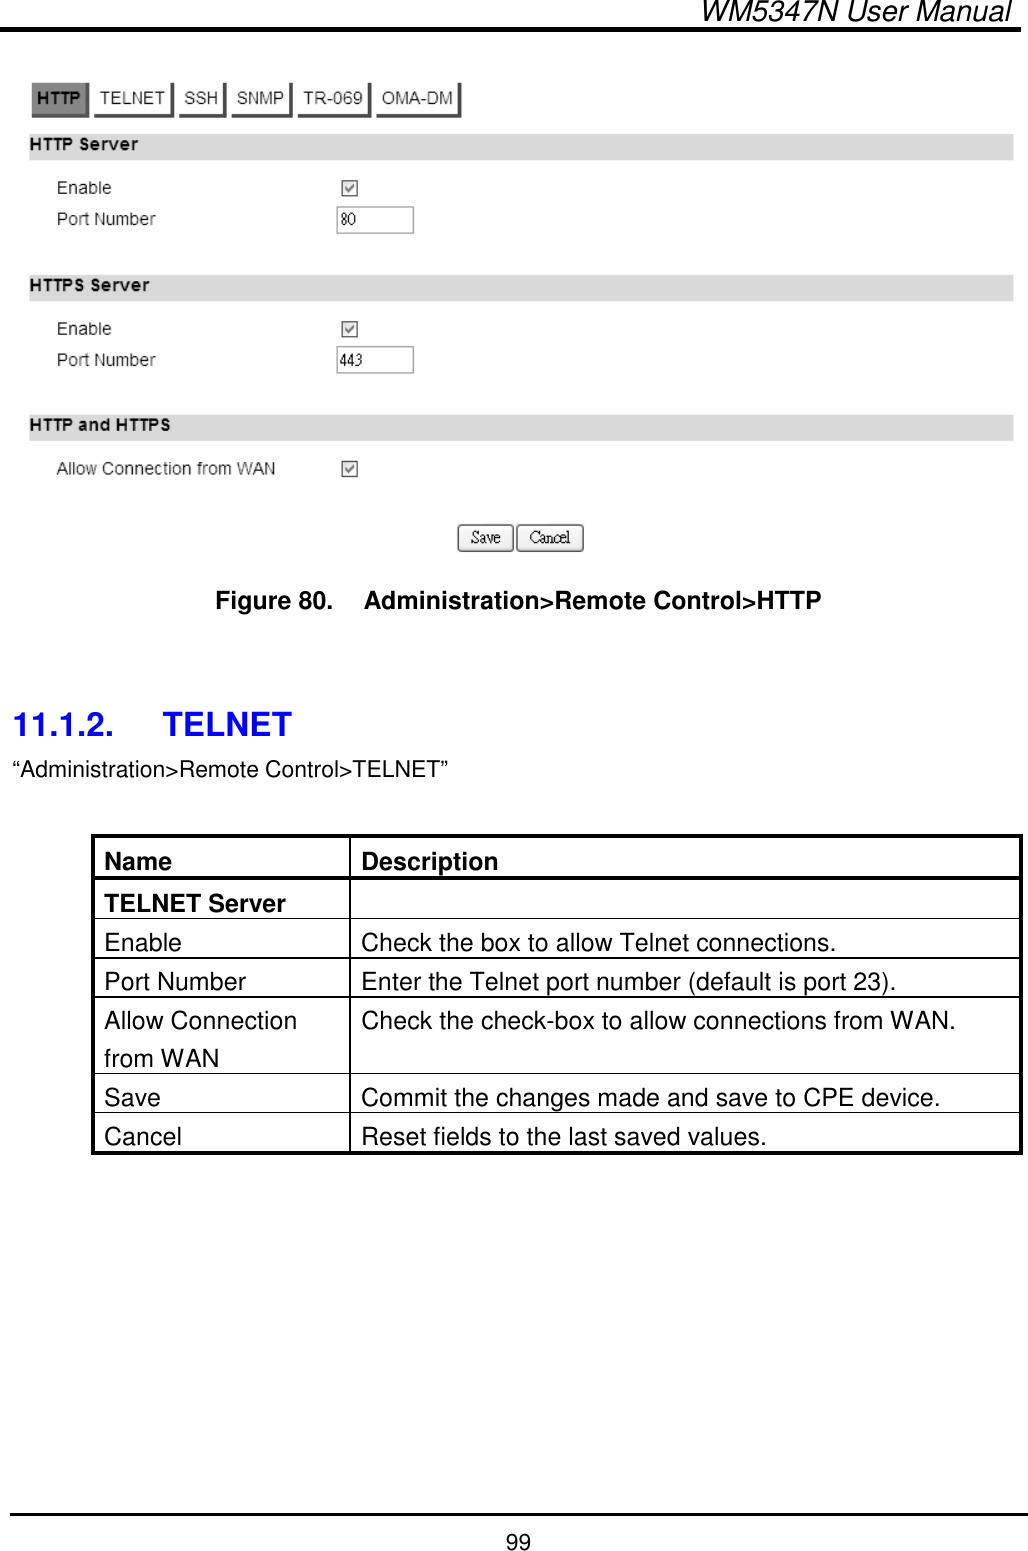  WM5347N User Manual  99  Figure 80.   Administration&gt;Remote Control&gt;HTTP   11.1.2.  TELNET “Administration&gt;Remote Control&gt;TELNET”  Name  Description TELNET Server   Enable  Check the box to allow Telnet connections. Port Number  Enter the Telnet port number (default is port 23). Allow Connection from WAN Check the check-box to allow connections from WAN. Save  Commit the changes made and save to CPE device. Cancel  Reset fields to the last saved values.  